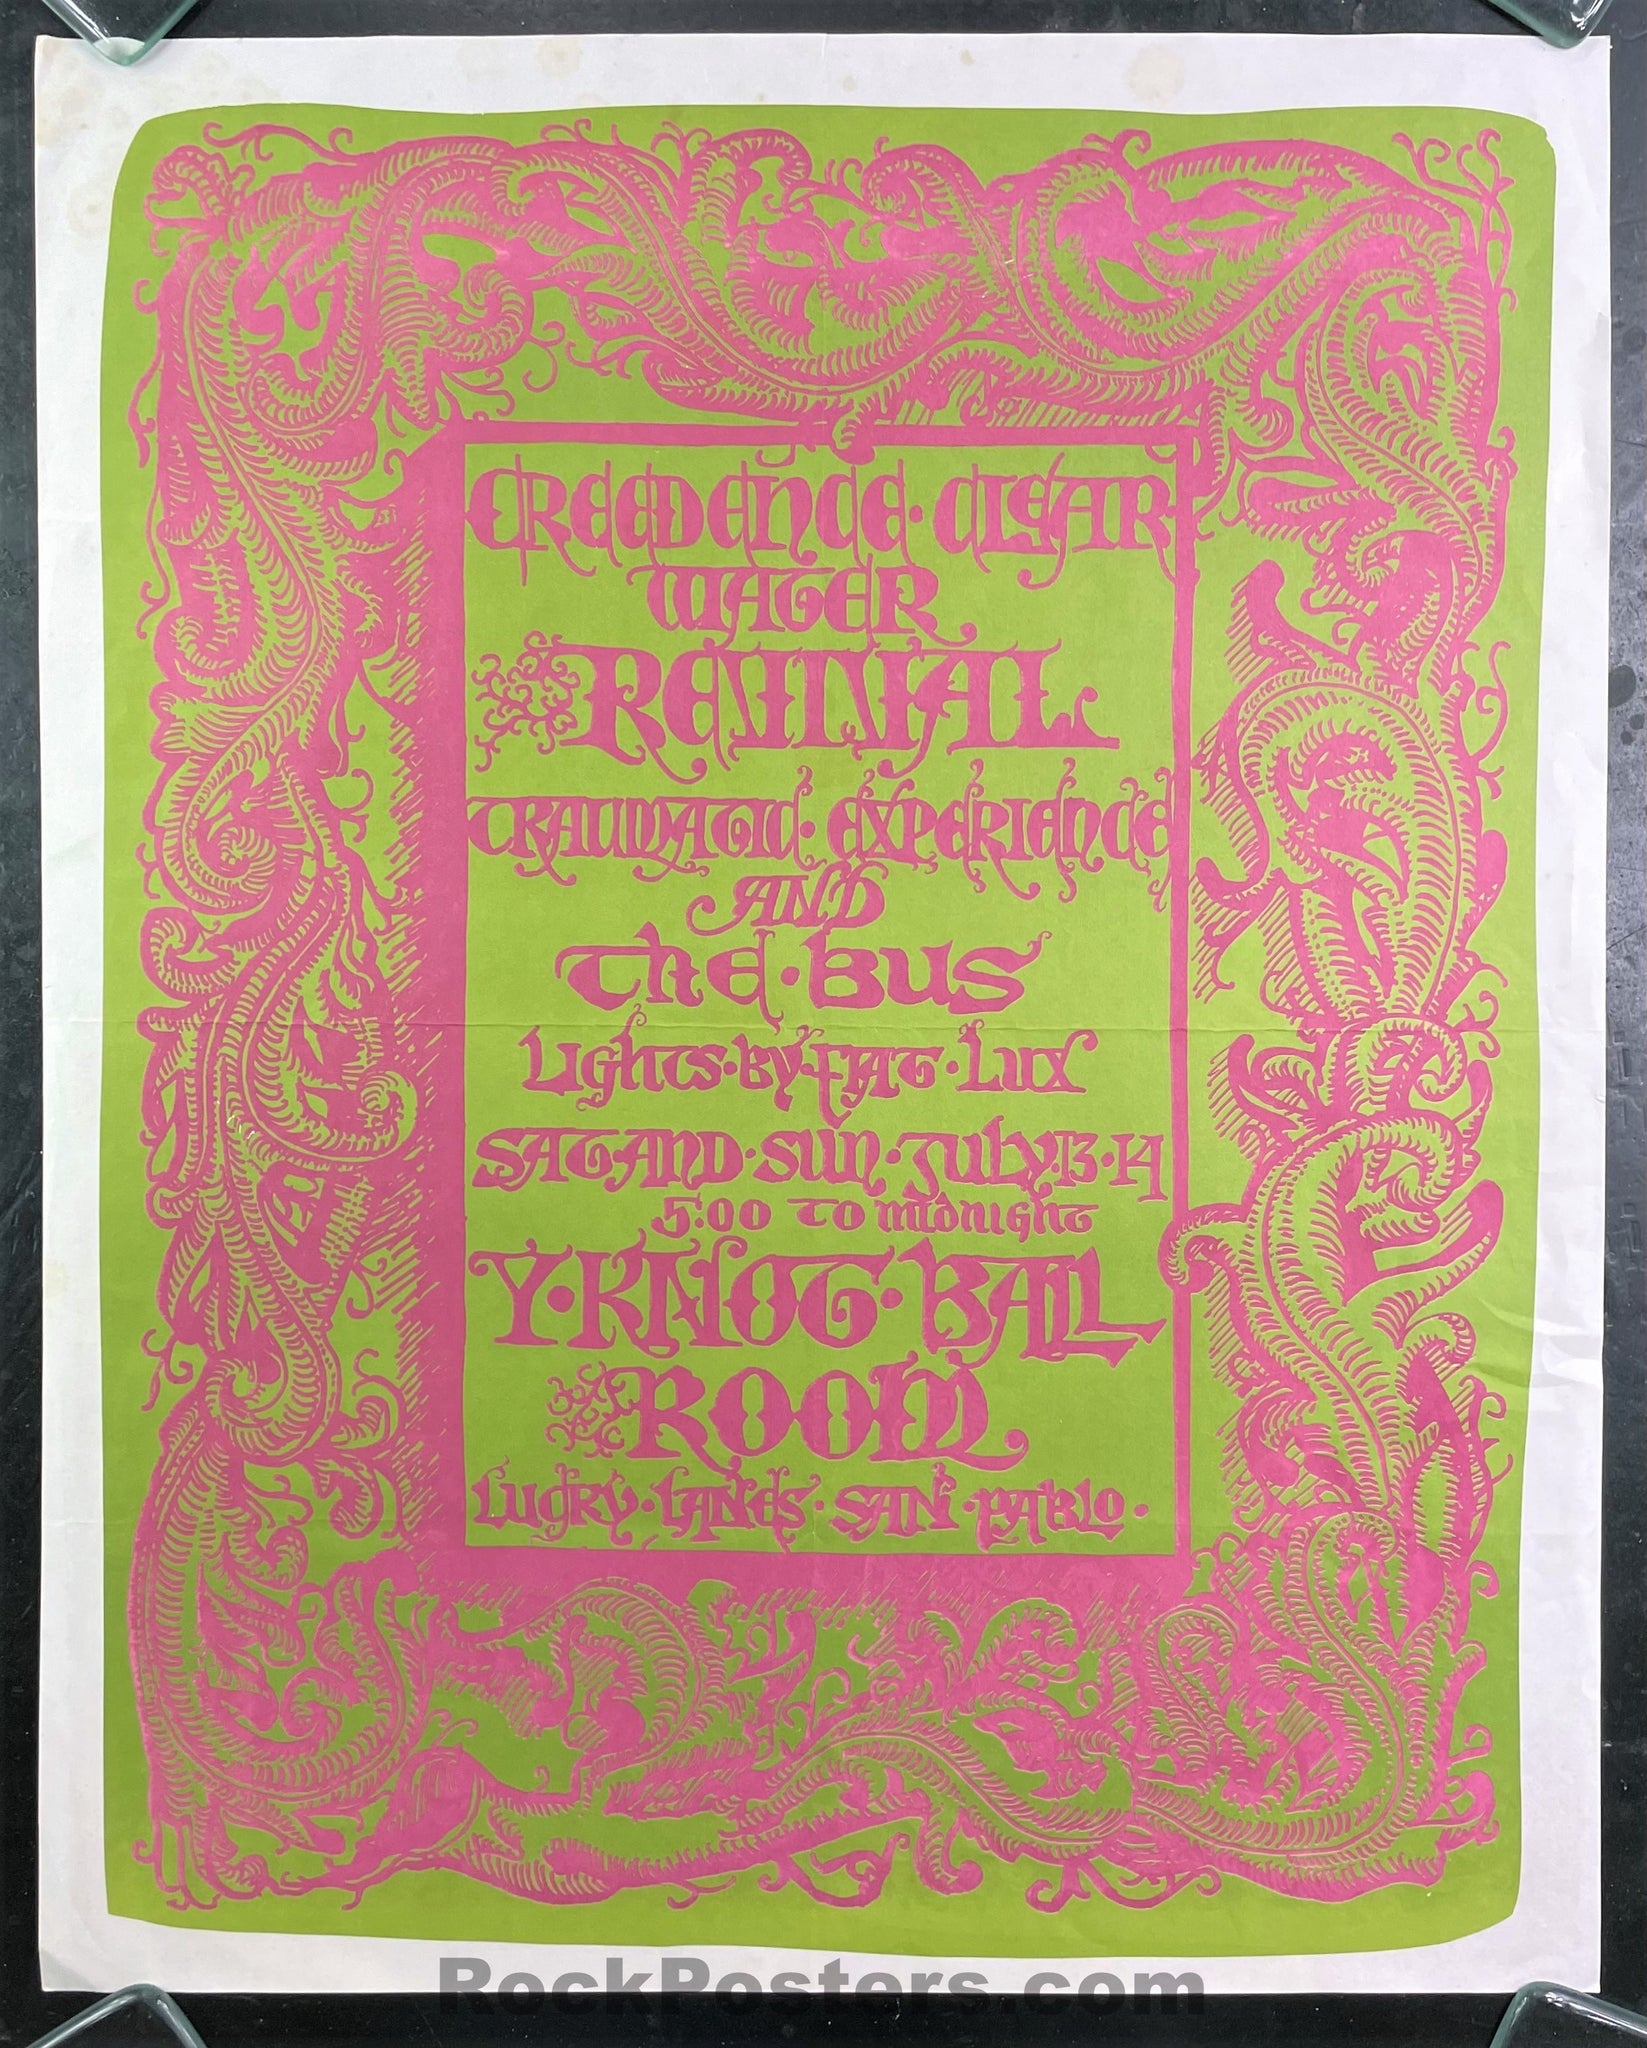 AUCTION - Psychedelic - Creedence Clearwater - 1967 Poster - San Pablo, CA - Very Good